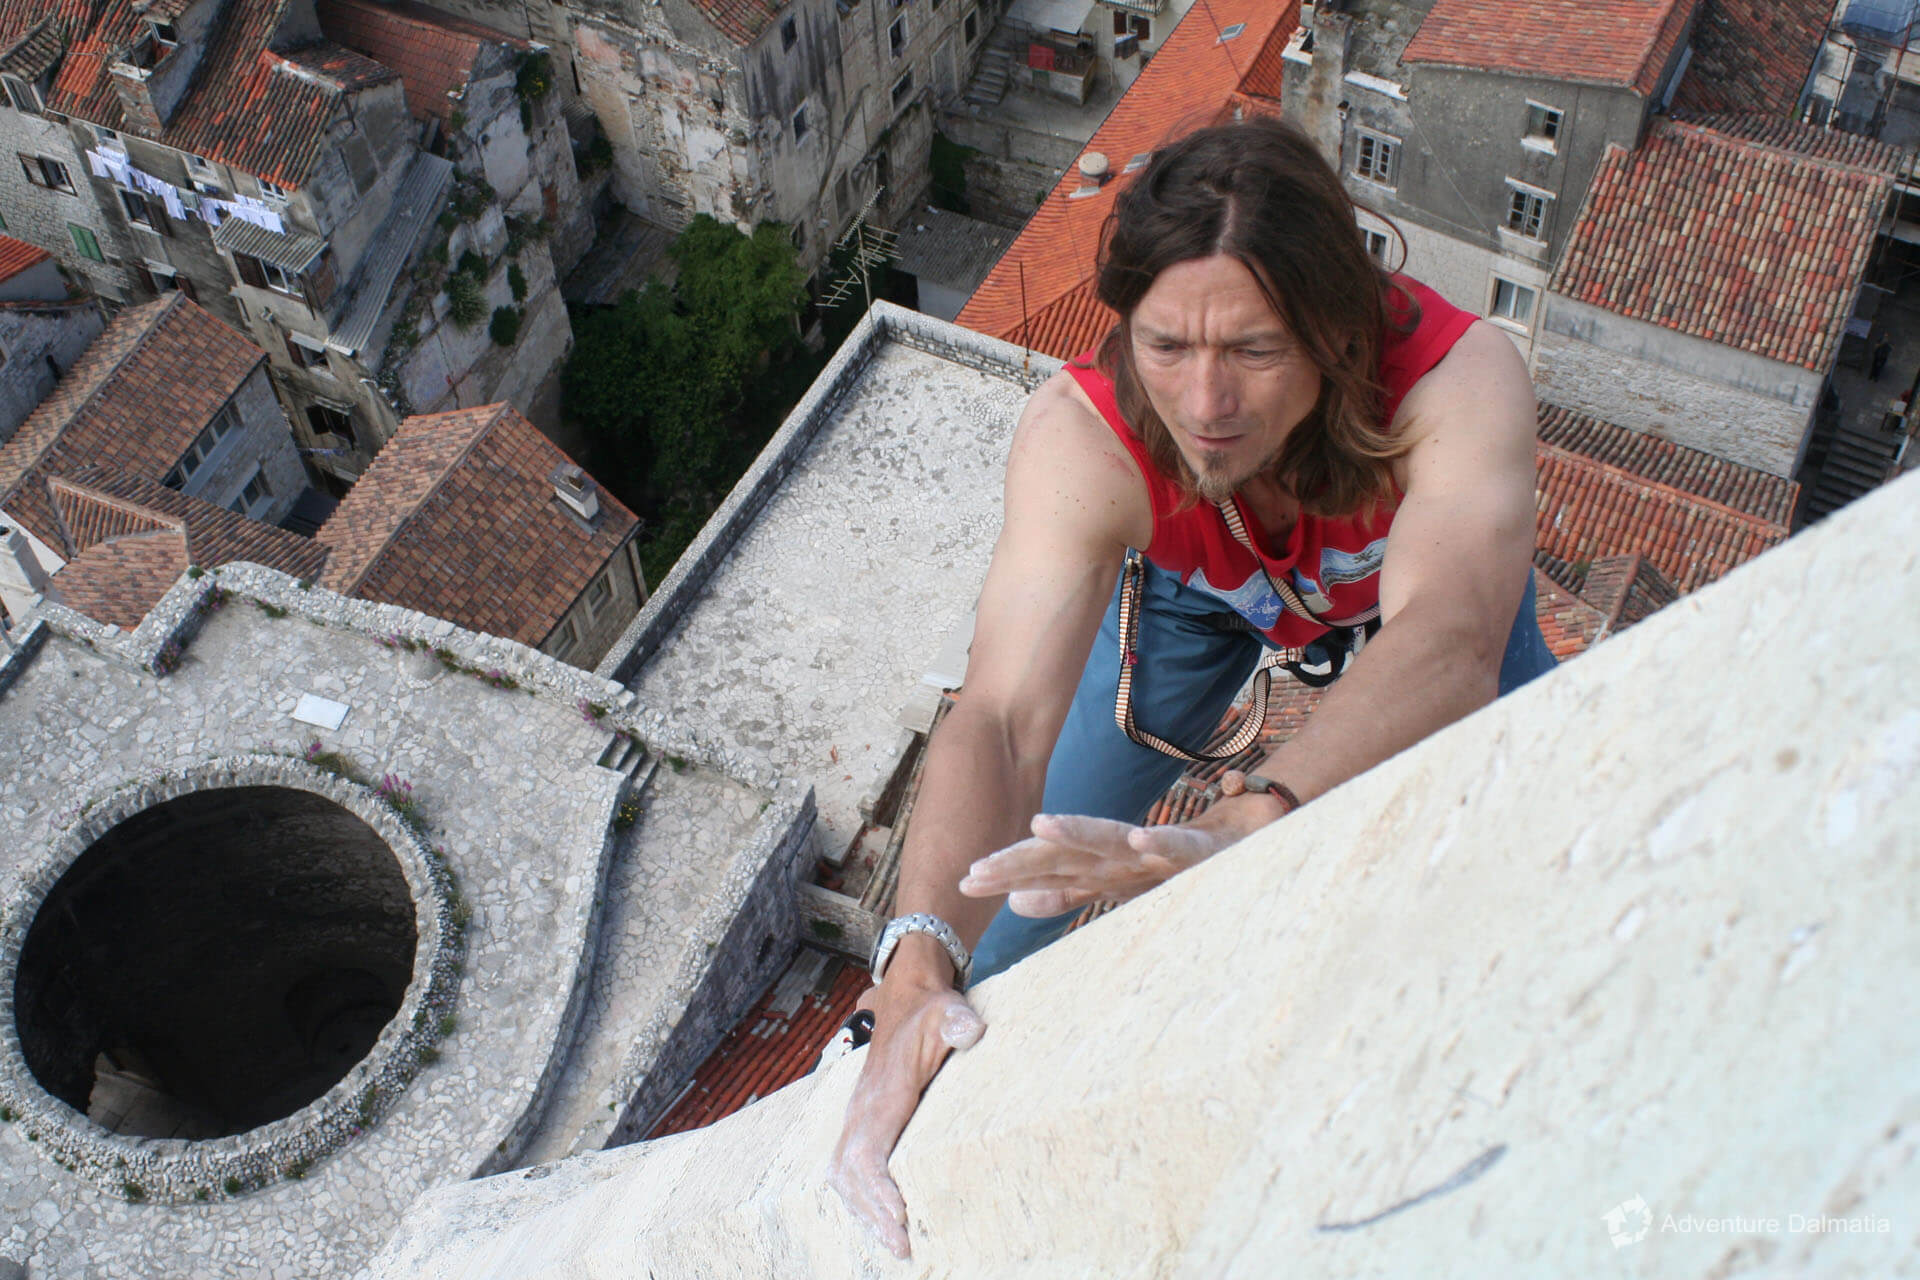 Croatian climber Ivica Matković climbs to the top of the 60m bell tower of Splits patron St Domnius.